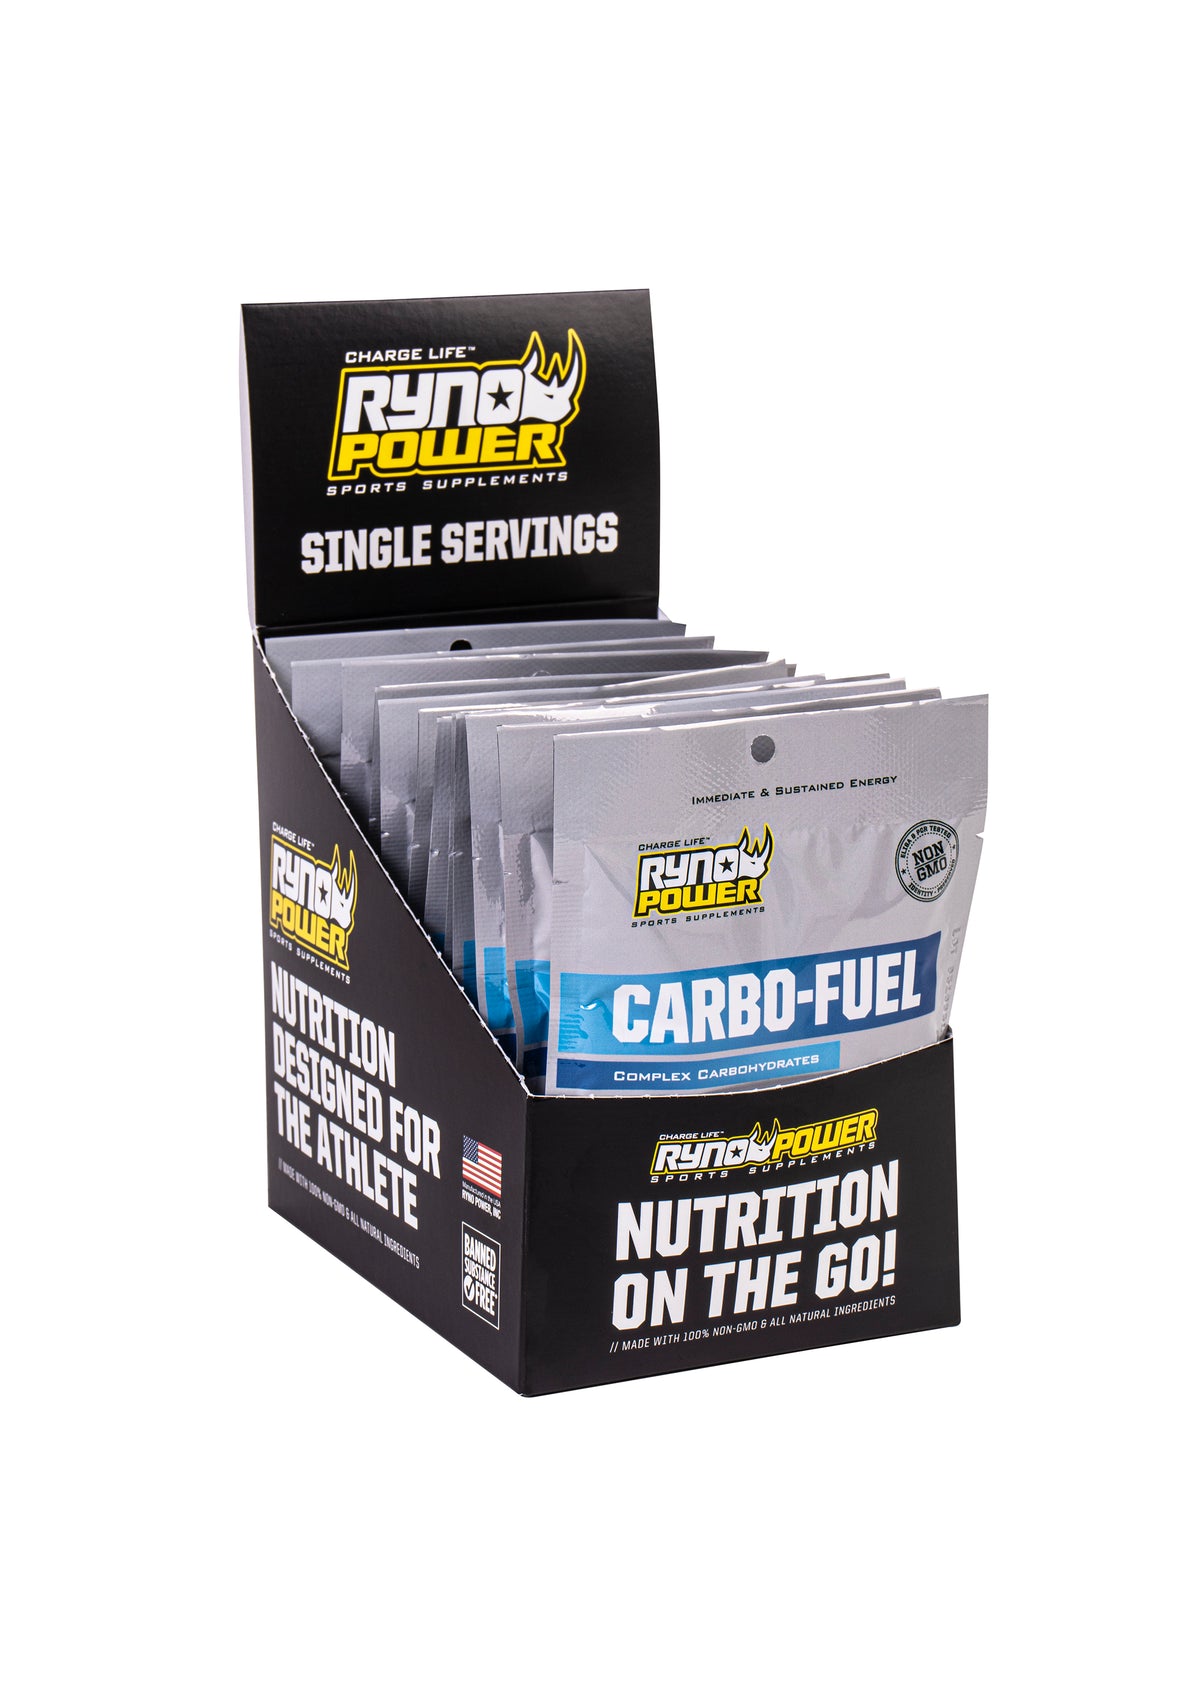 CARBO-FUEL Stimulant-Free Drink Mix | Single Servings